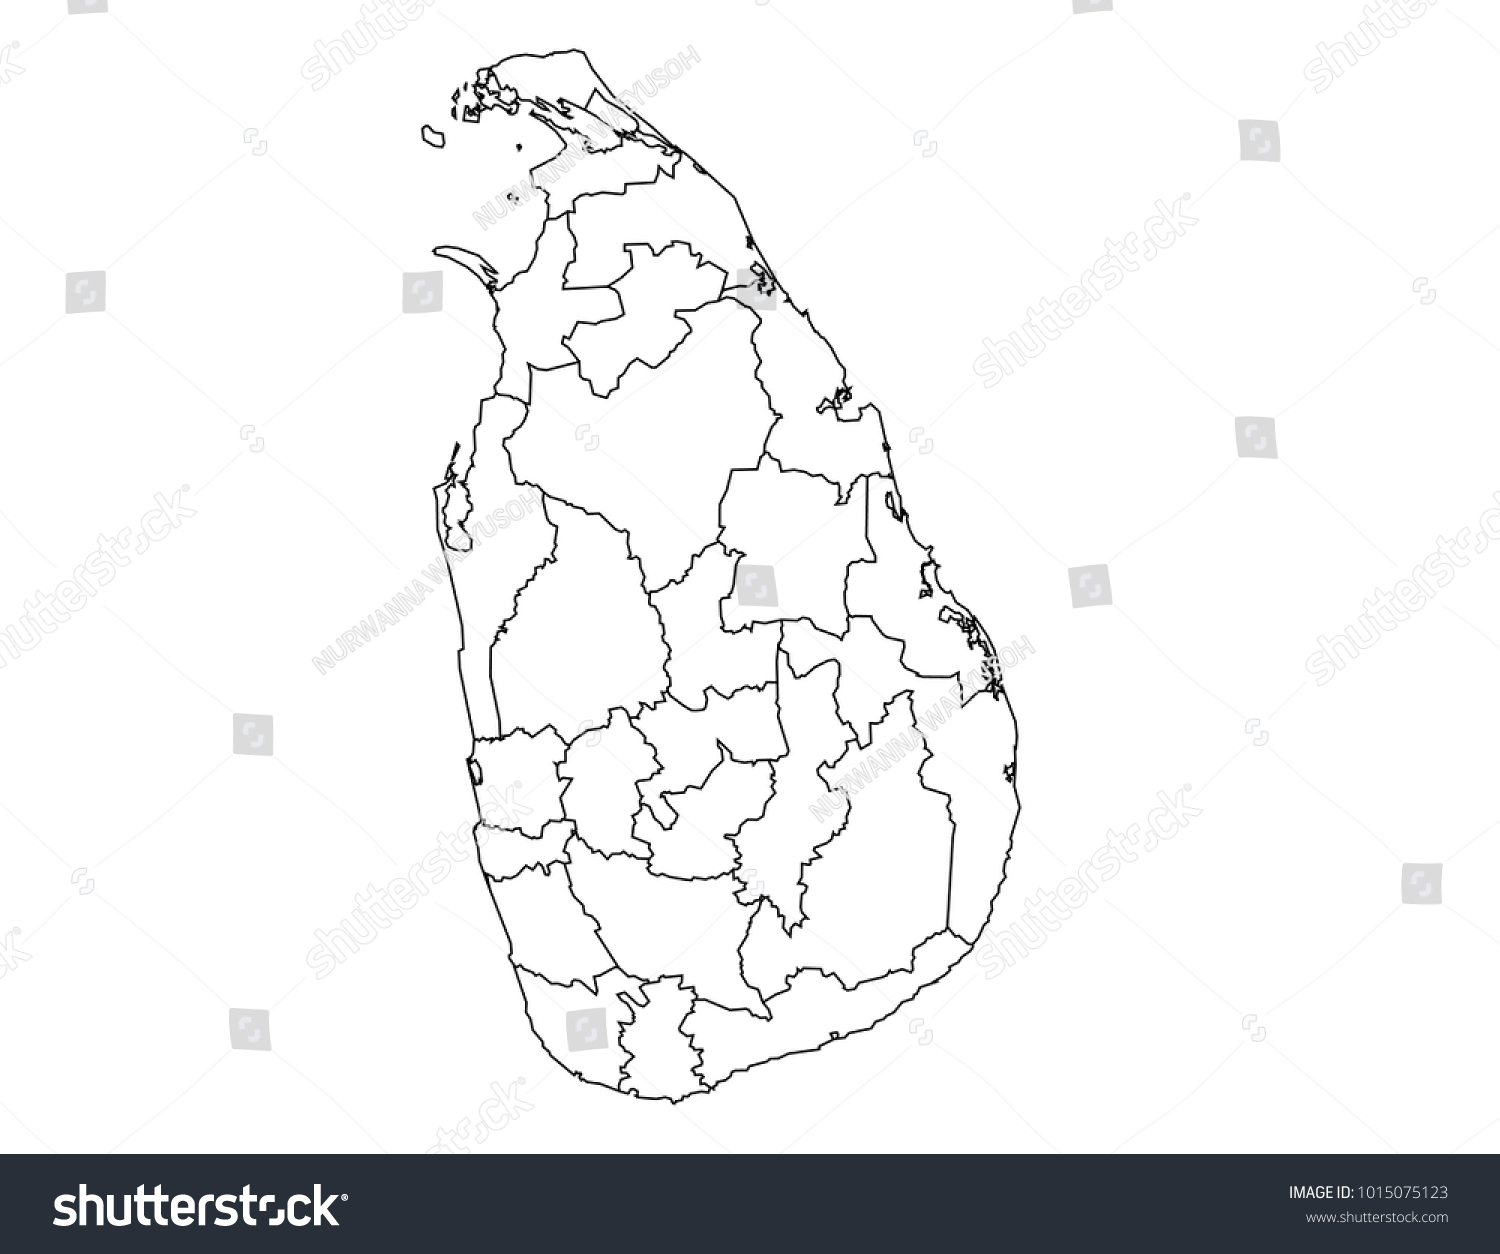 Sri Lanka Outline Map Detailed Isolated Stock Vector (Royalty Free ...